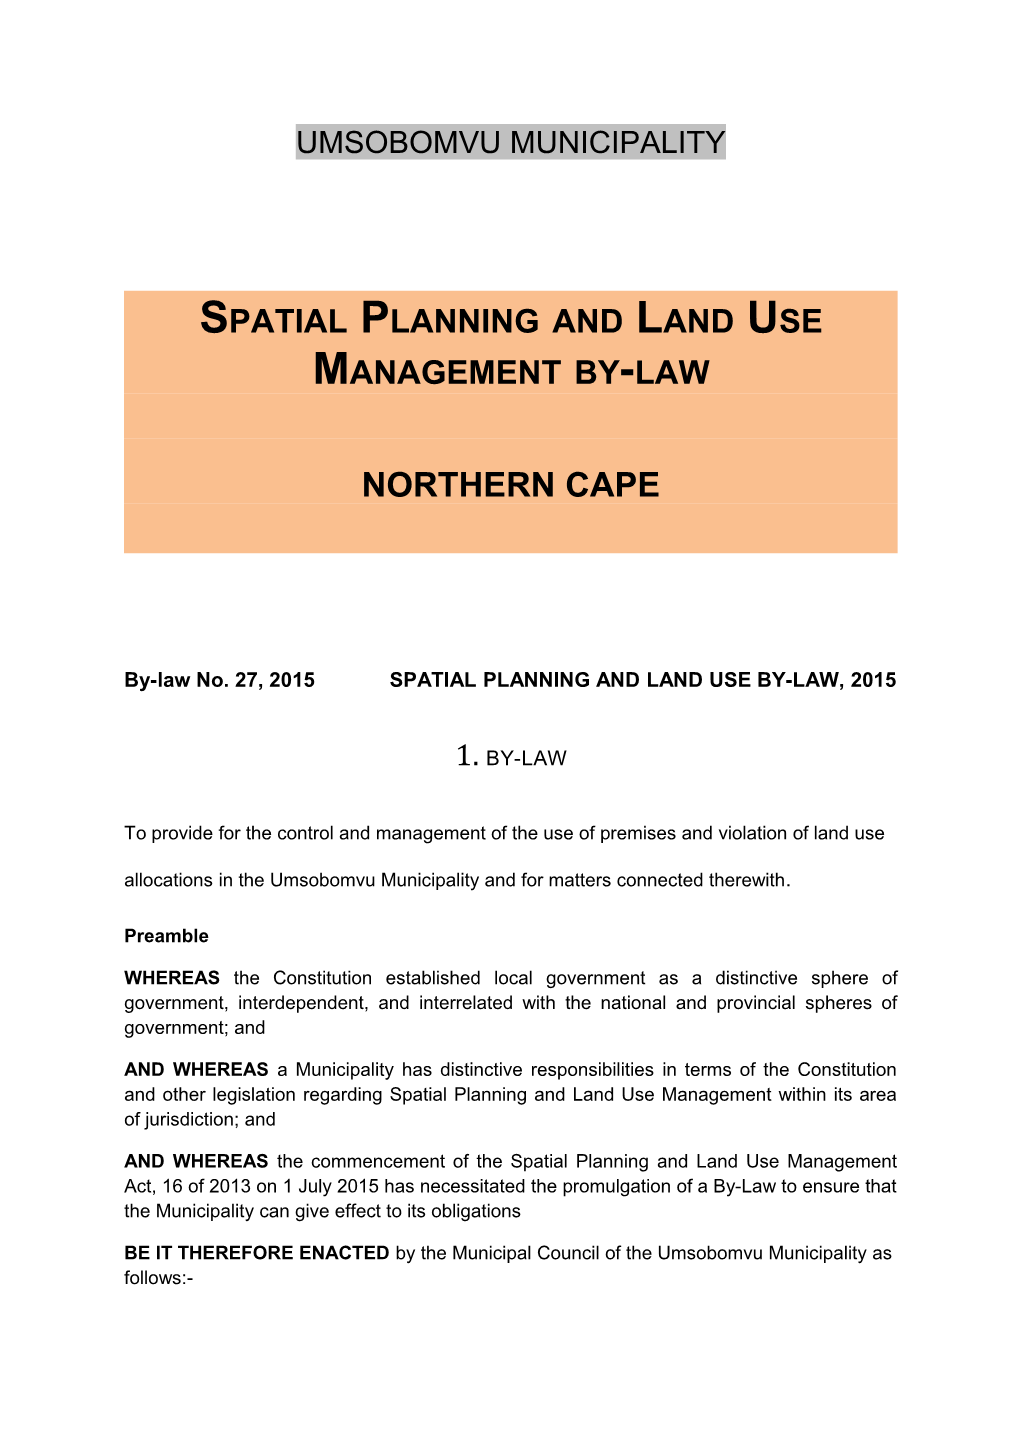 Spatial Planning and Land Use Management By-Law